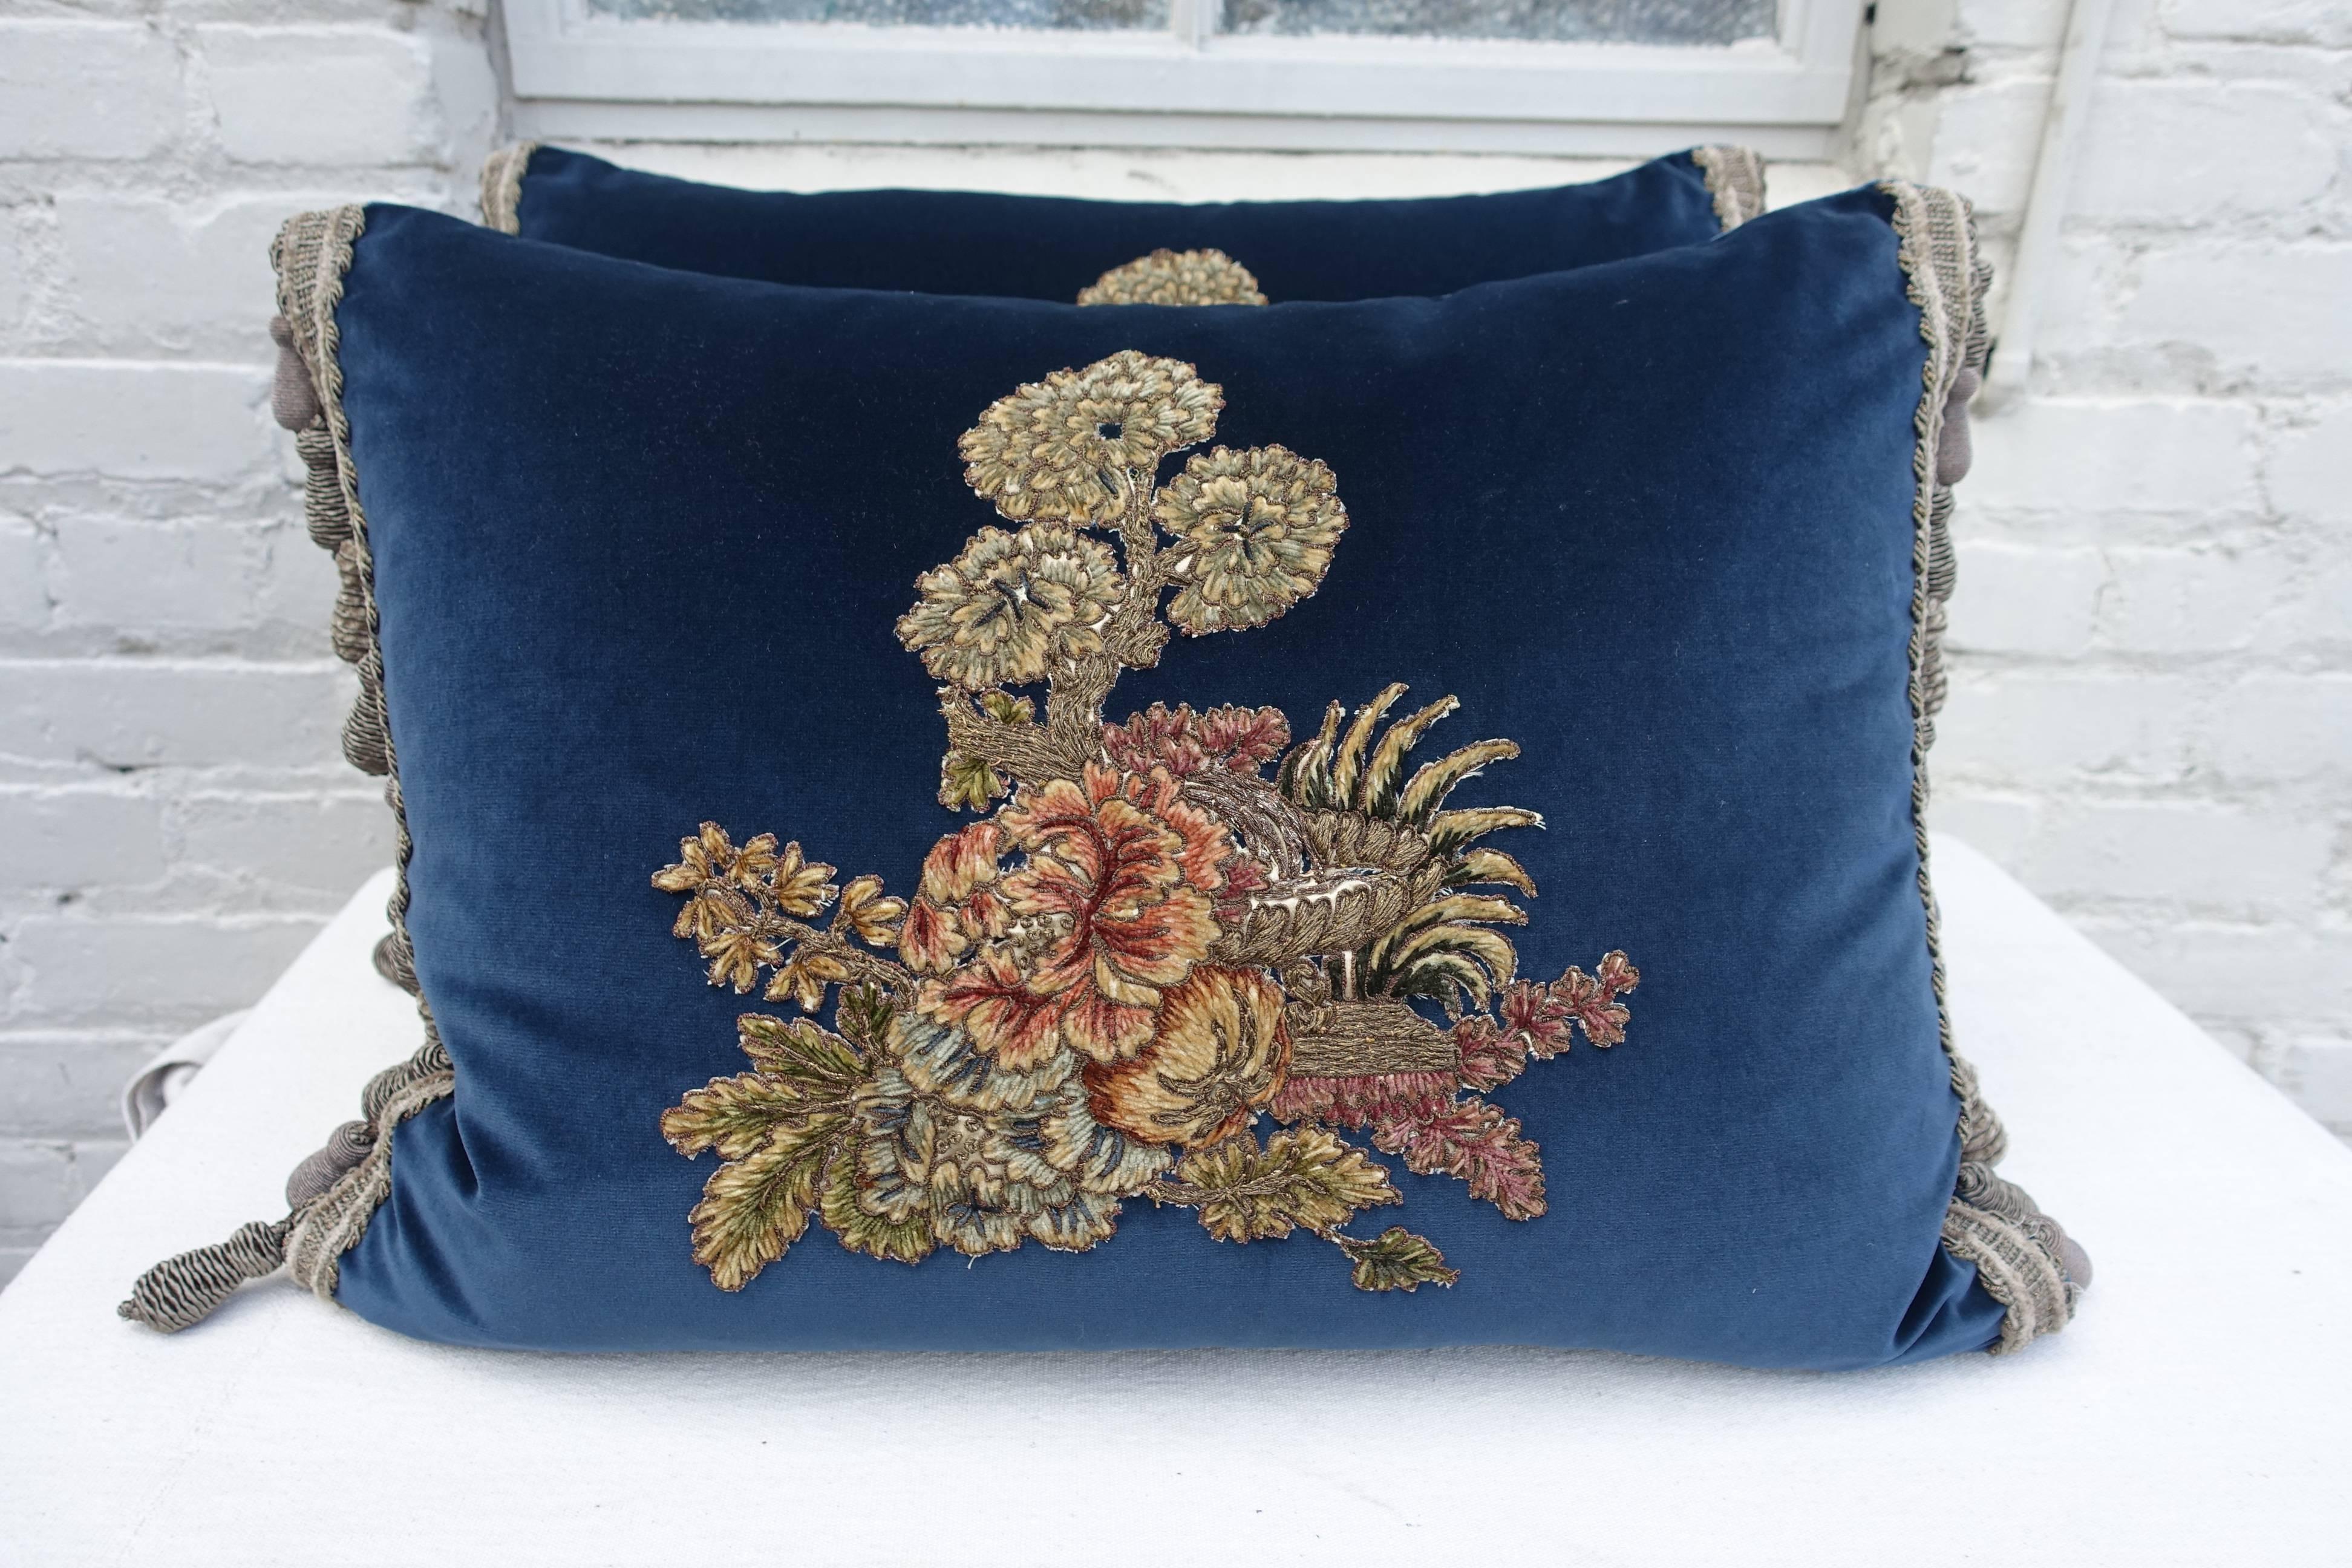 Pair of custom pillows made with 19th century French metallic and chenille handmade embroidered textiles hand applied on contemporary deep blue velvet and finished with handmade tassel fringe at both sides. Down inserts. Sewn shut.